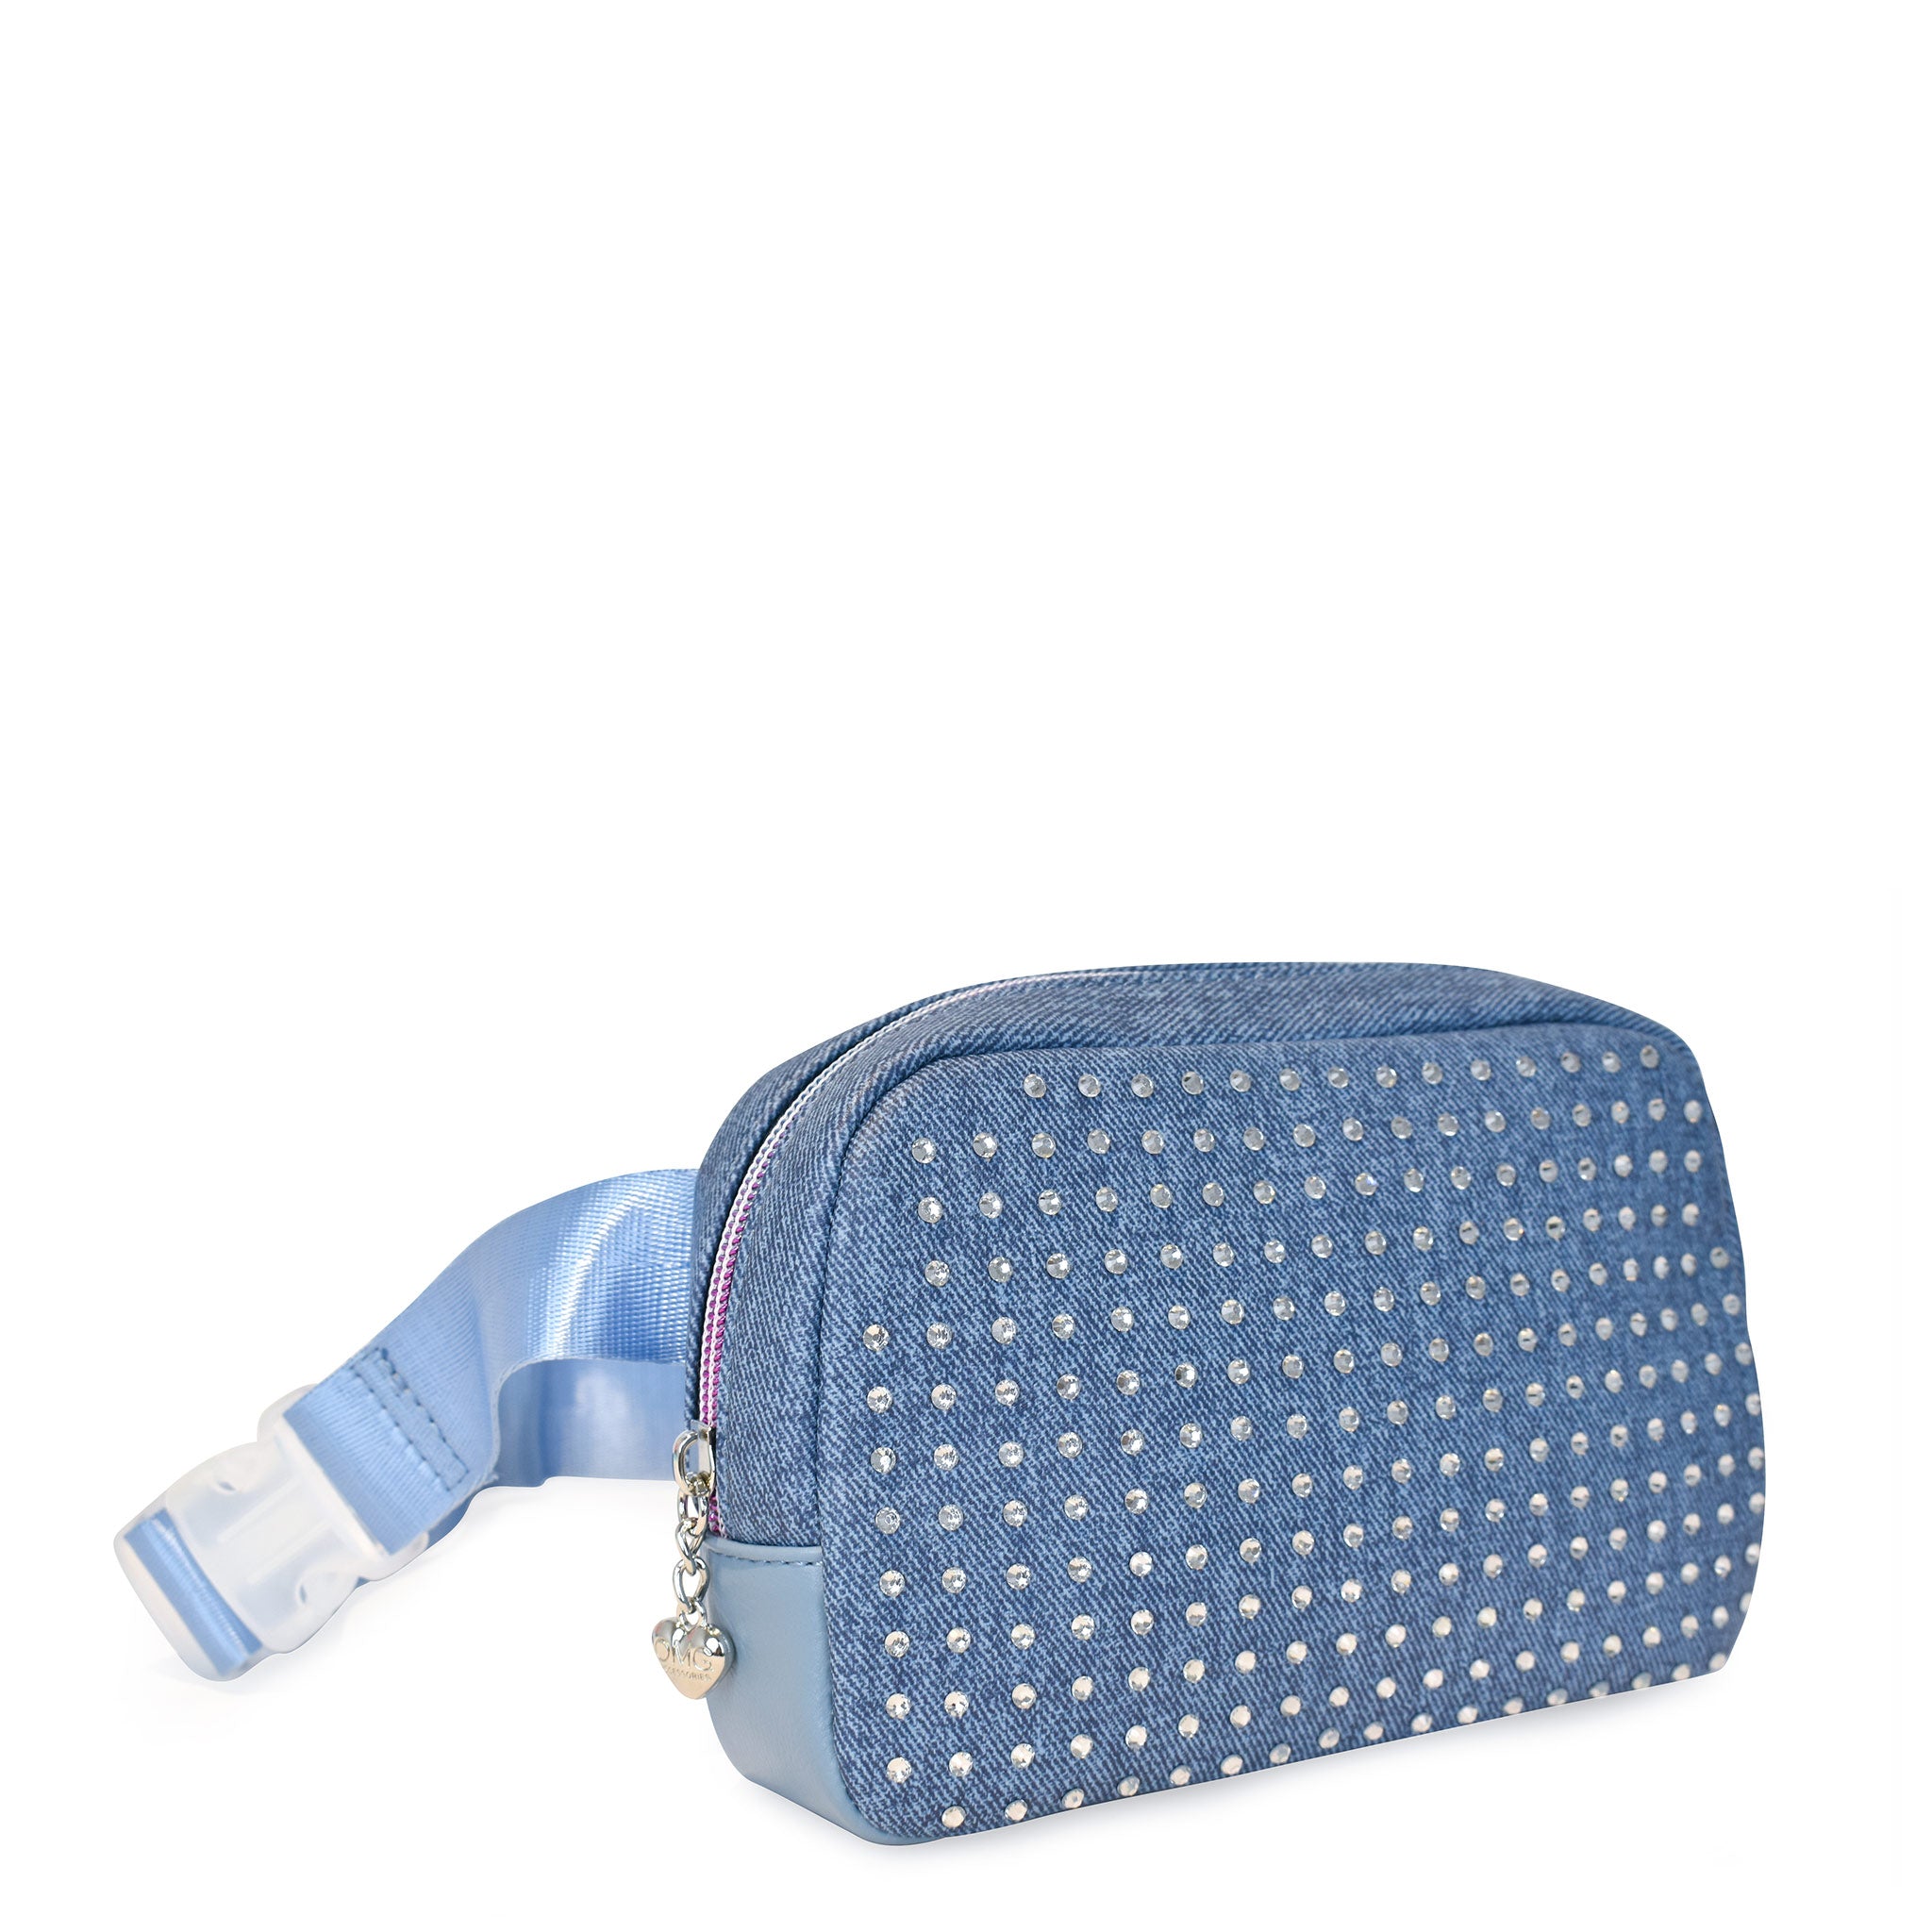 Side  view of a rhinestone covered denim fanny pack with a light blue adjustable belt